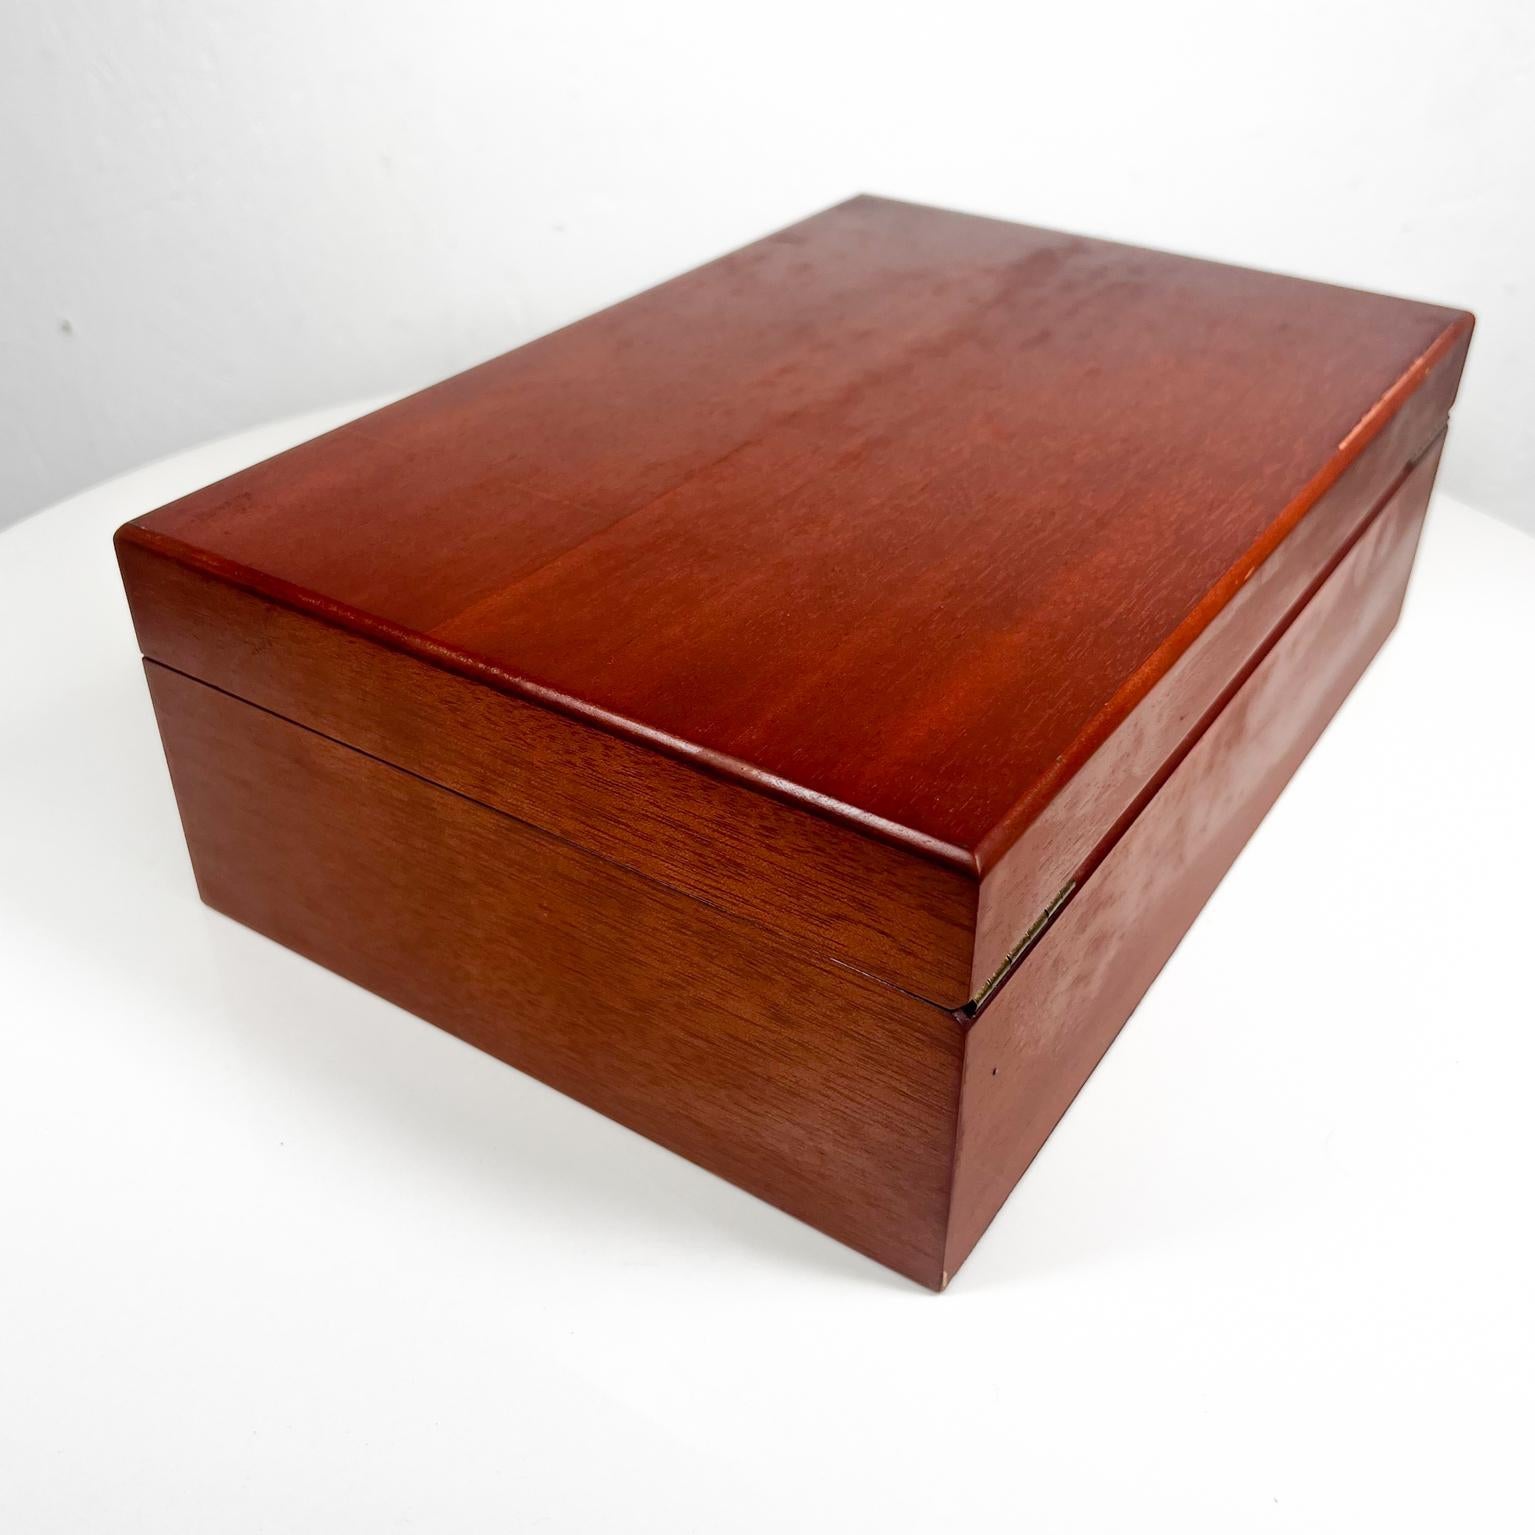 1950s Modern Wood Jewelry Box Felt Sectioned Interior Compartments 4